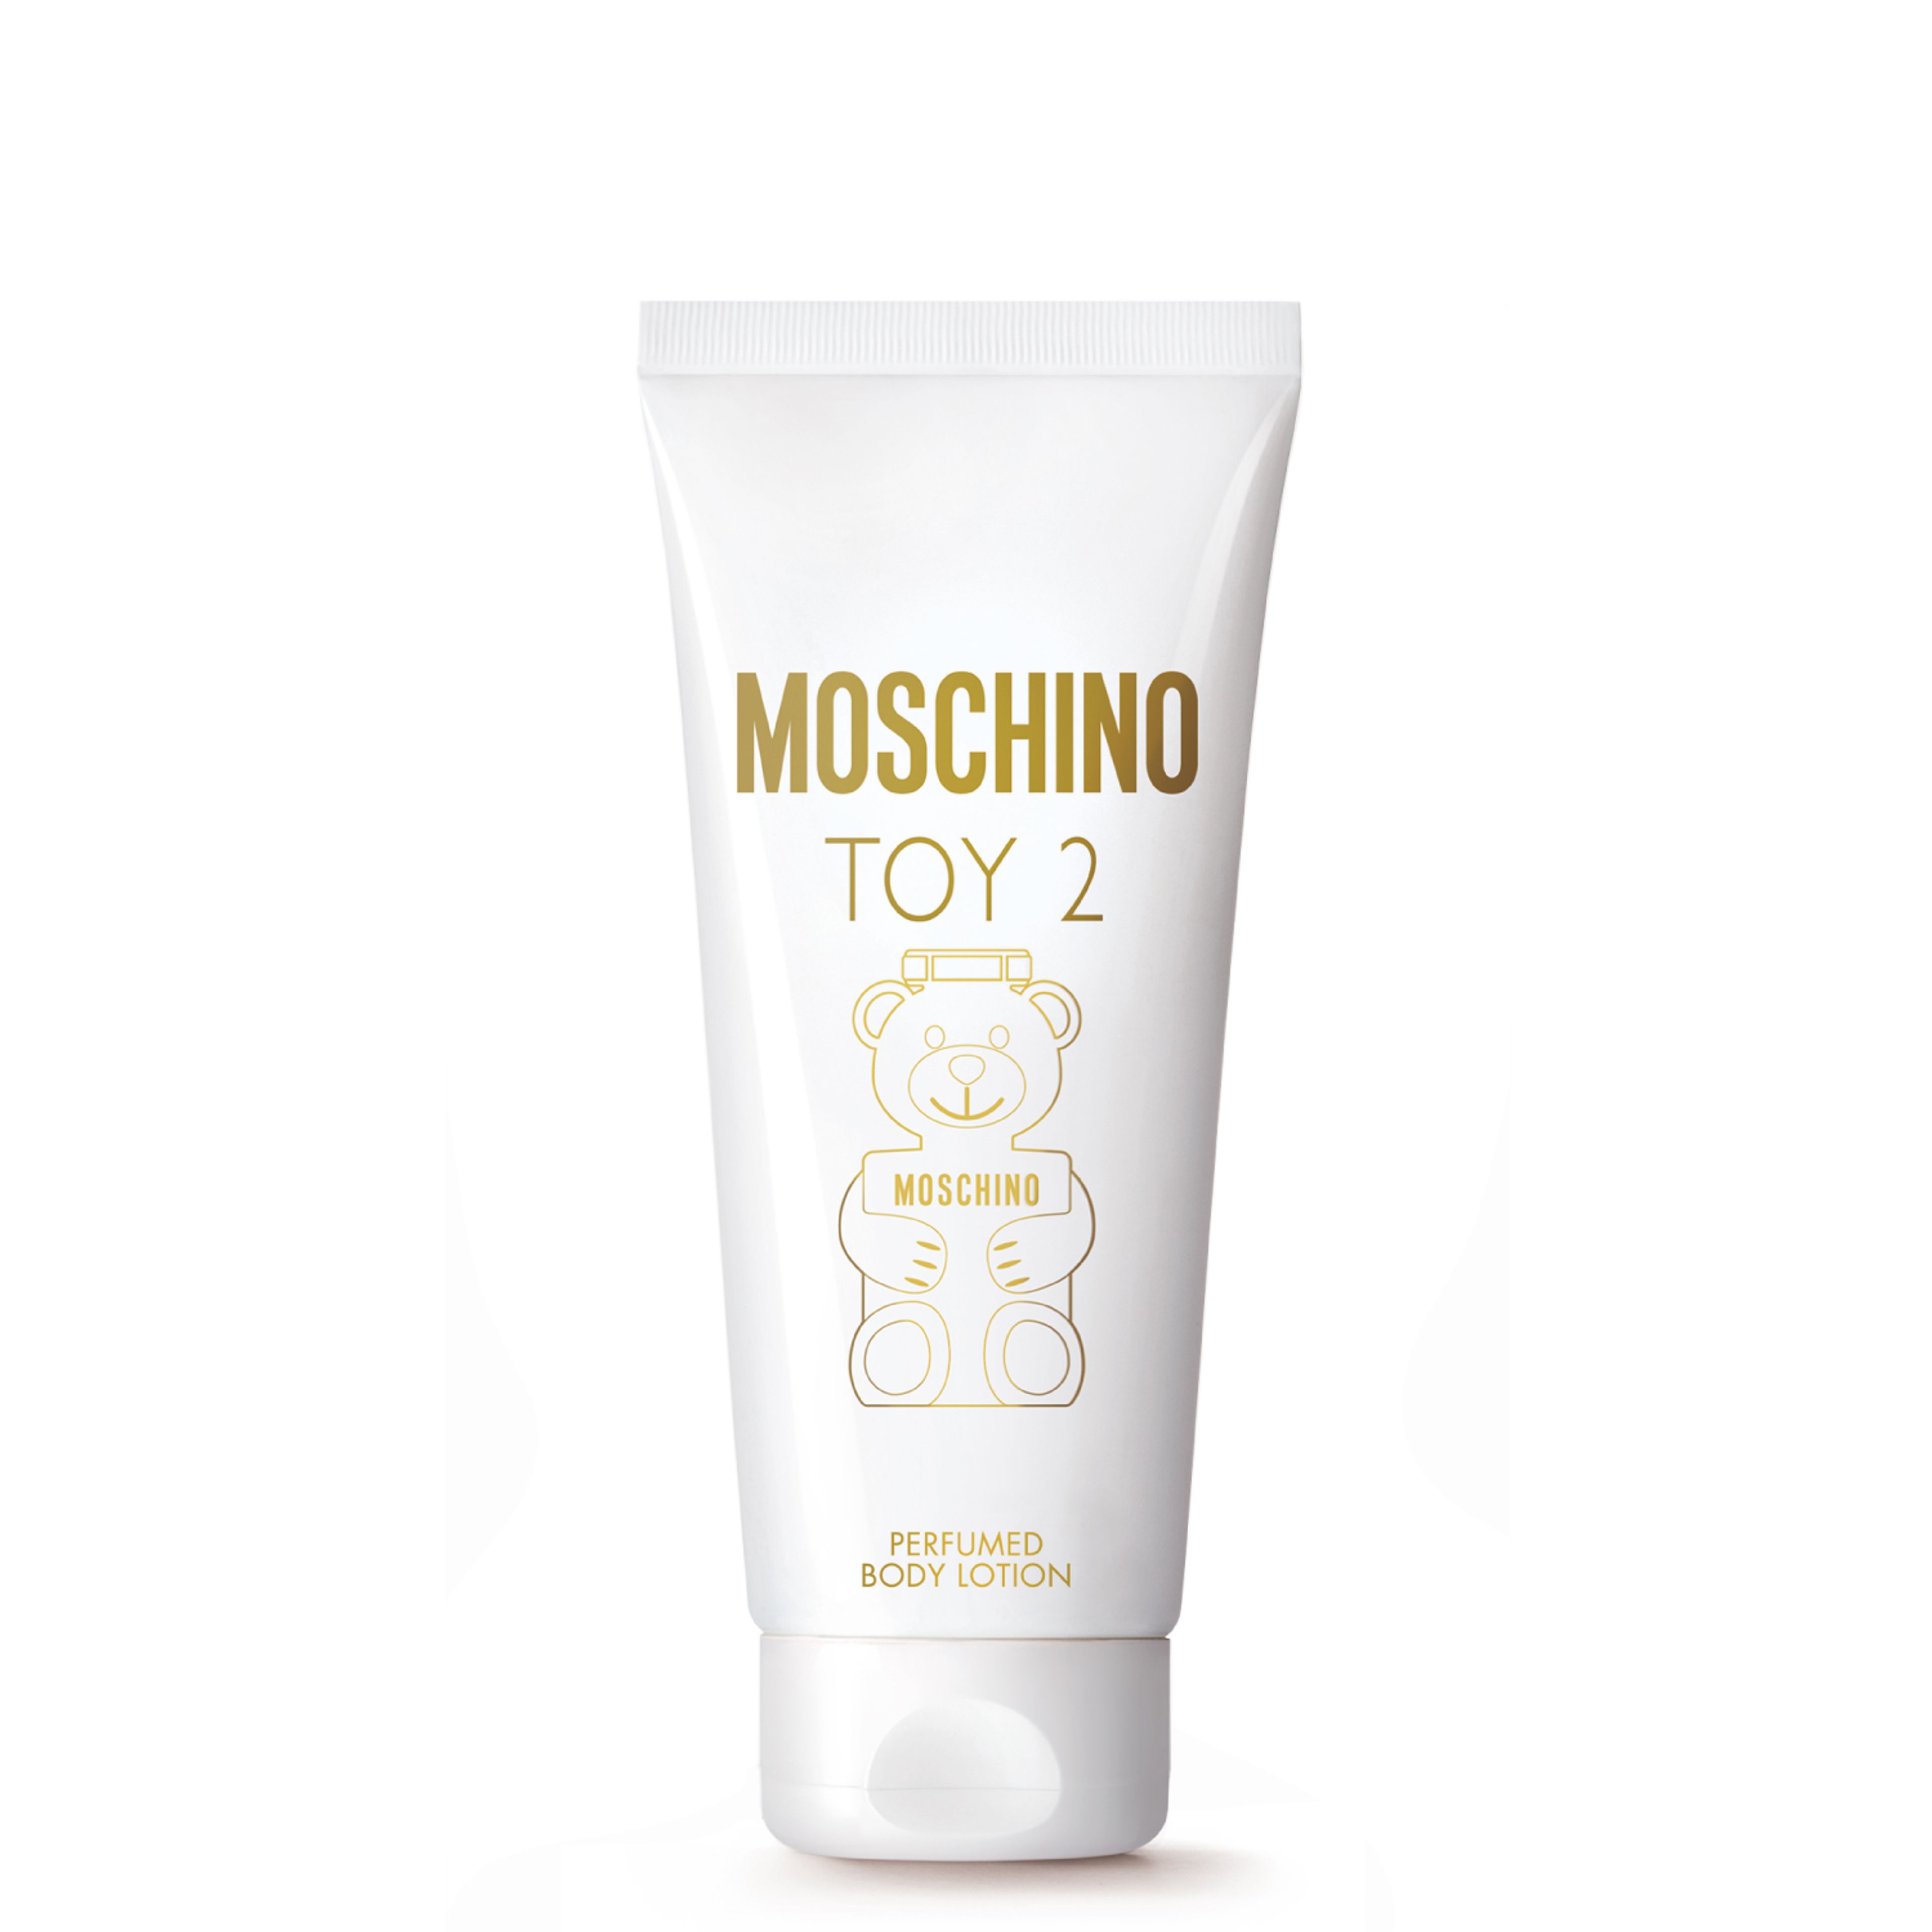 Moschino Moschino Toy 2 Perfumed Body Lotion 1